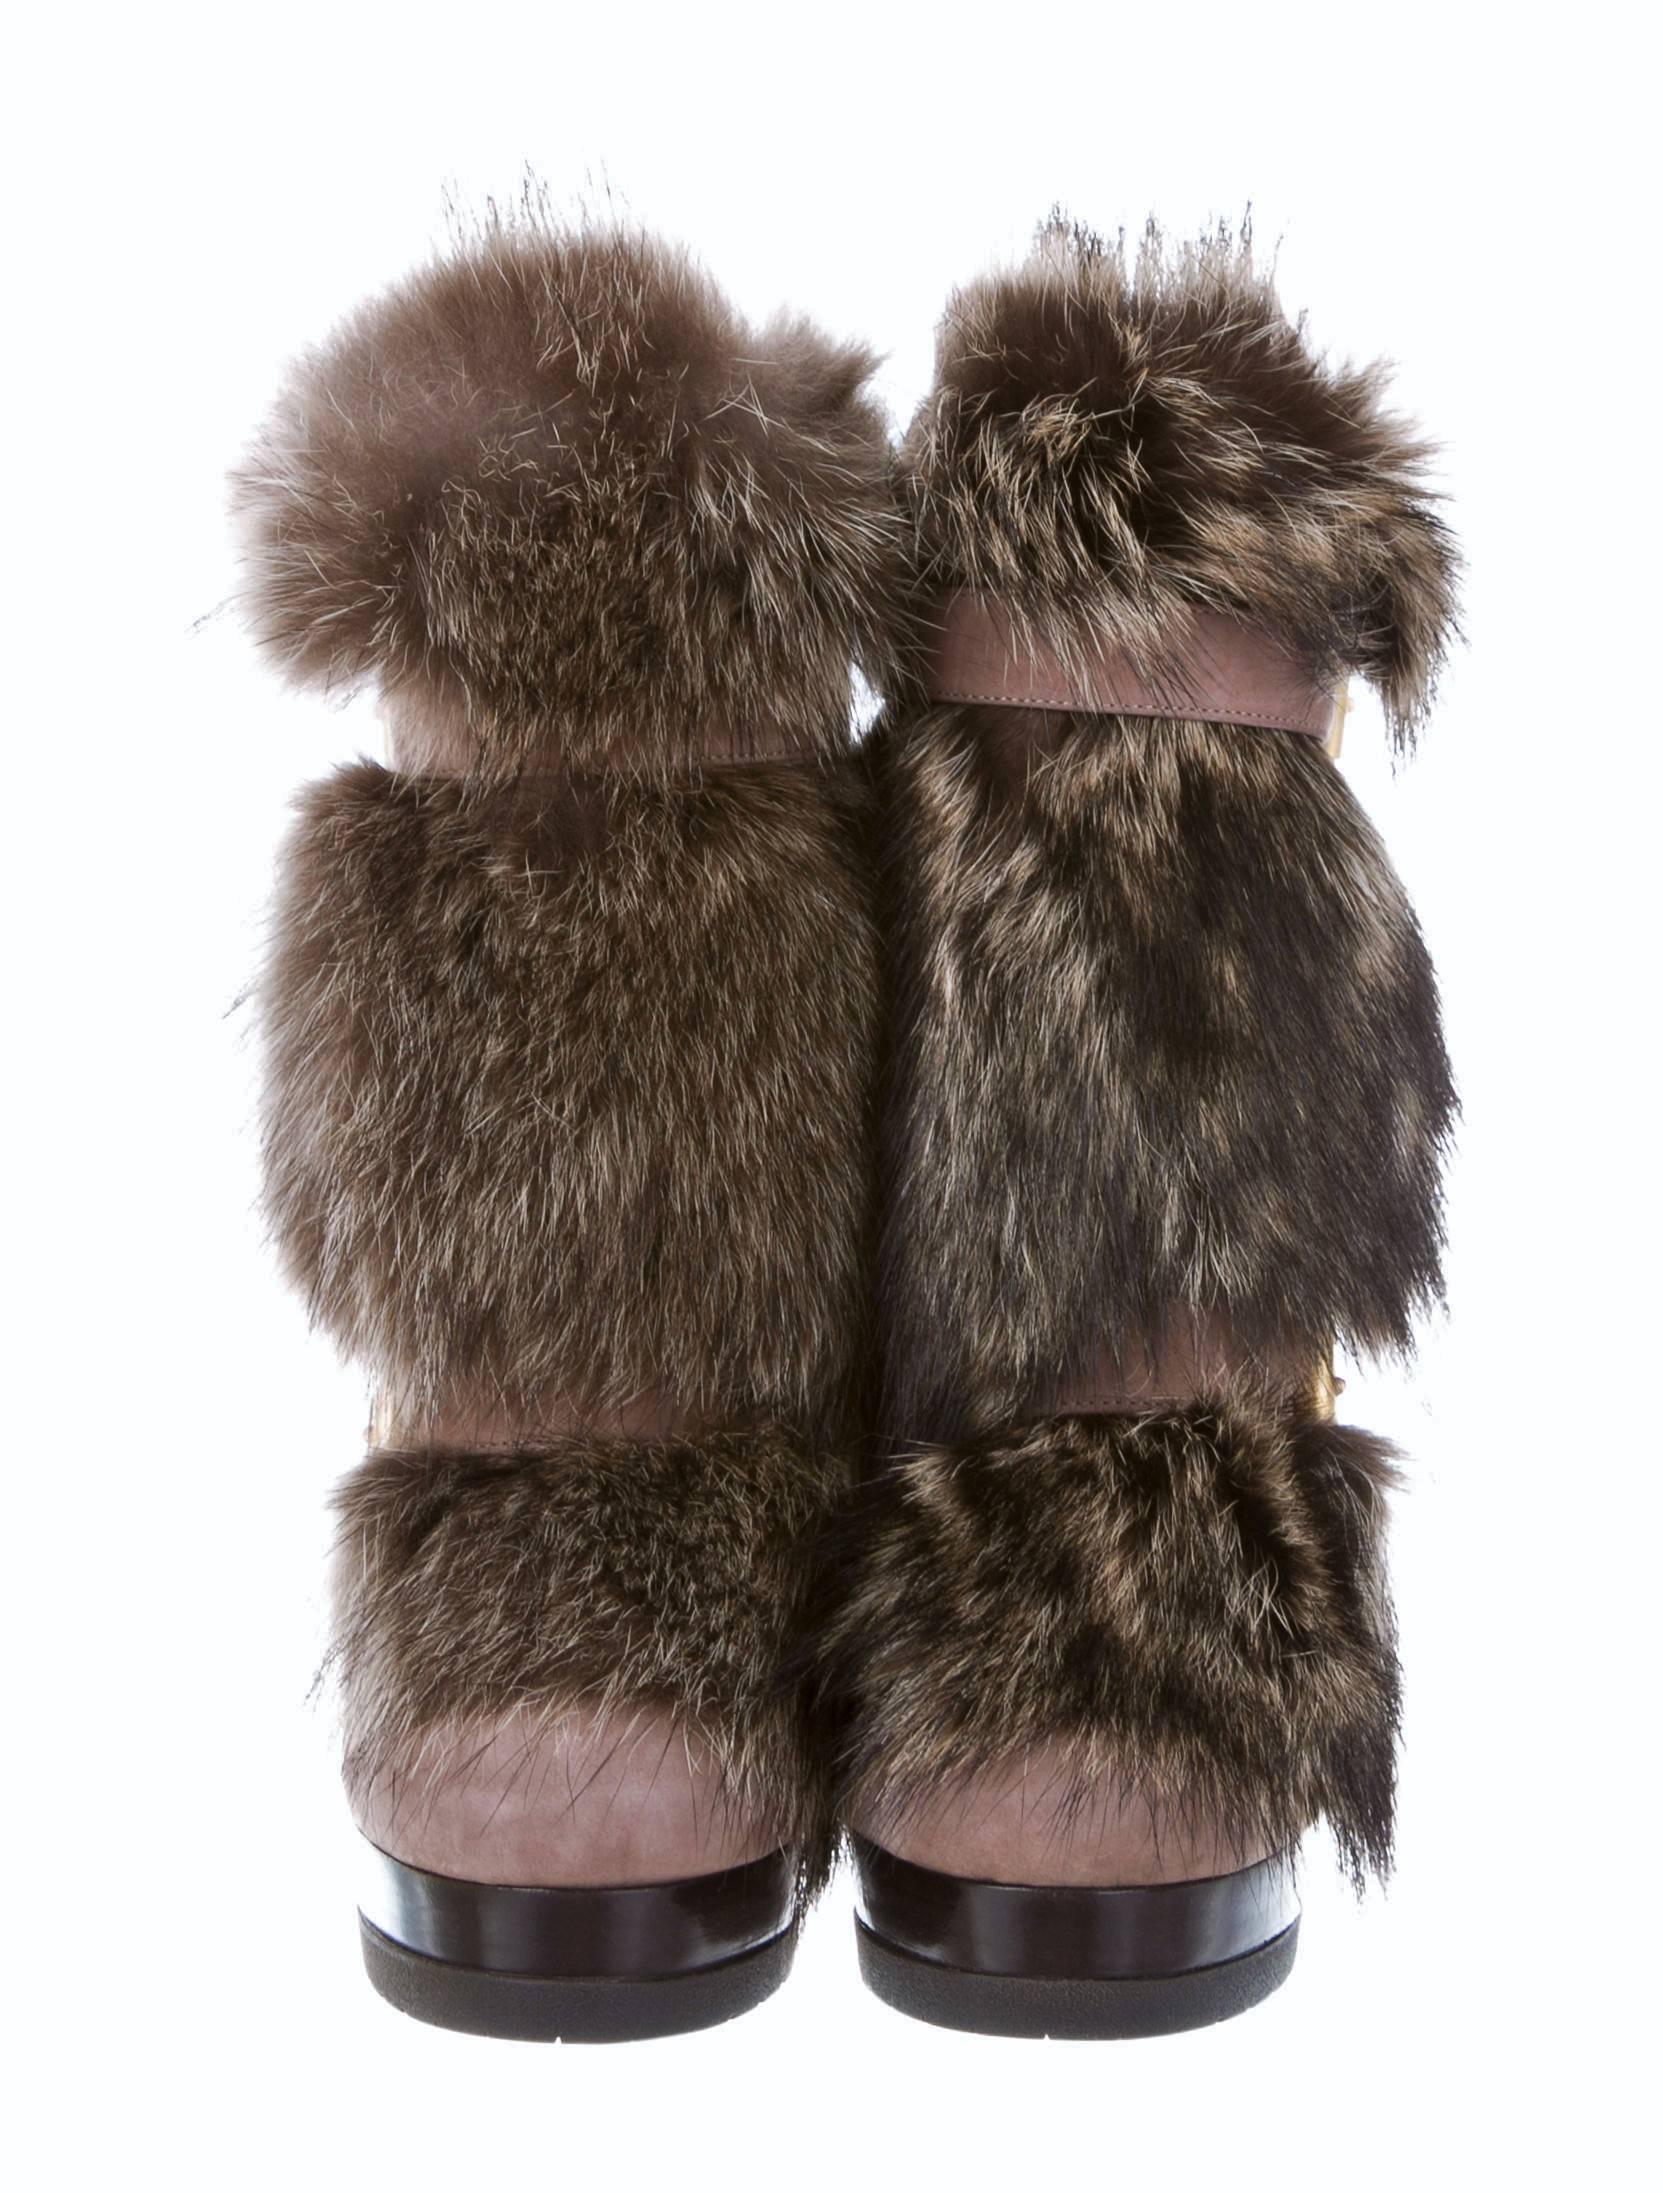 Fendi Fur Boots
Brand New
* Euro: 37
* Stunning Beaver Fur Lines the Front and the Inside of the Boots
* Soft Taupe Nubuck Leather
* Zips up the Back
* 1.25